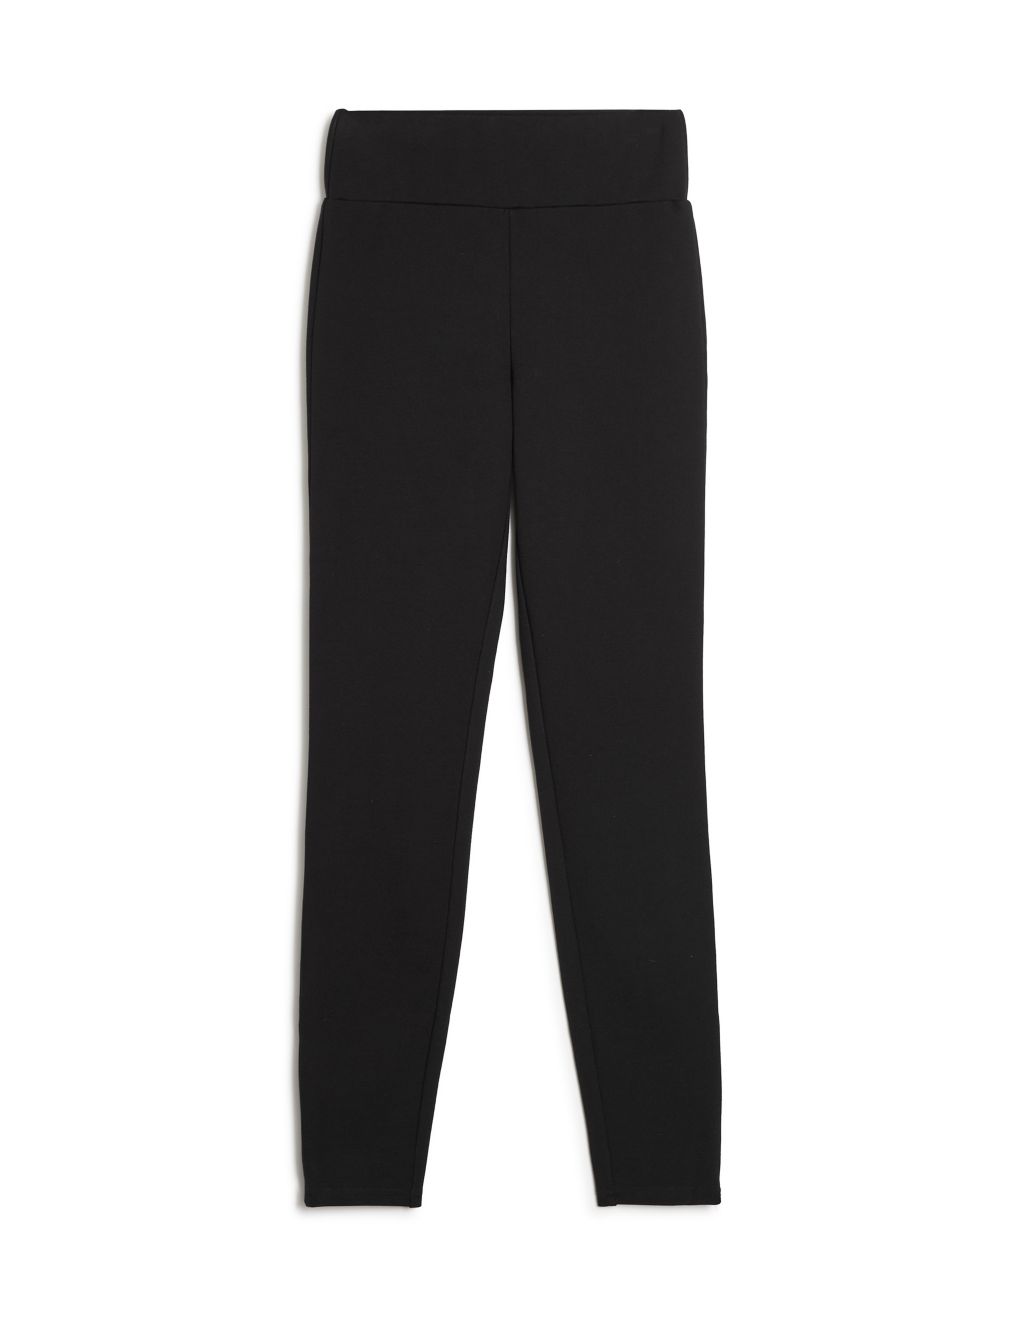 Jersey Elasticated Waist Slim Fit Trousers image 2